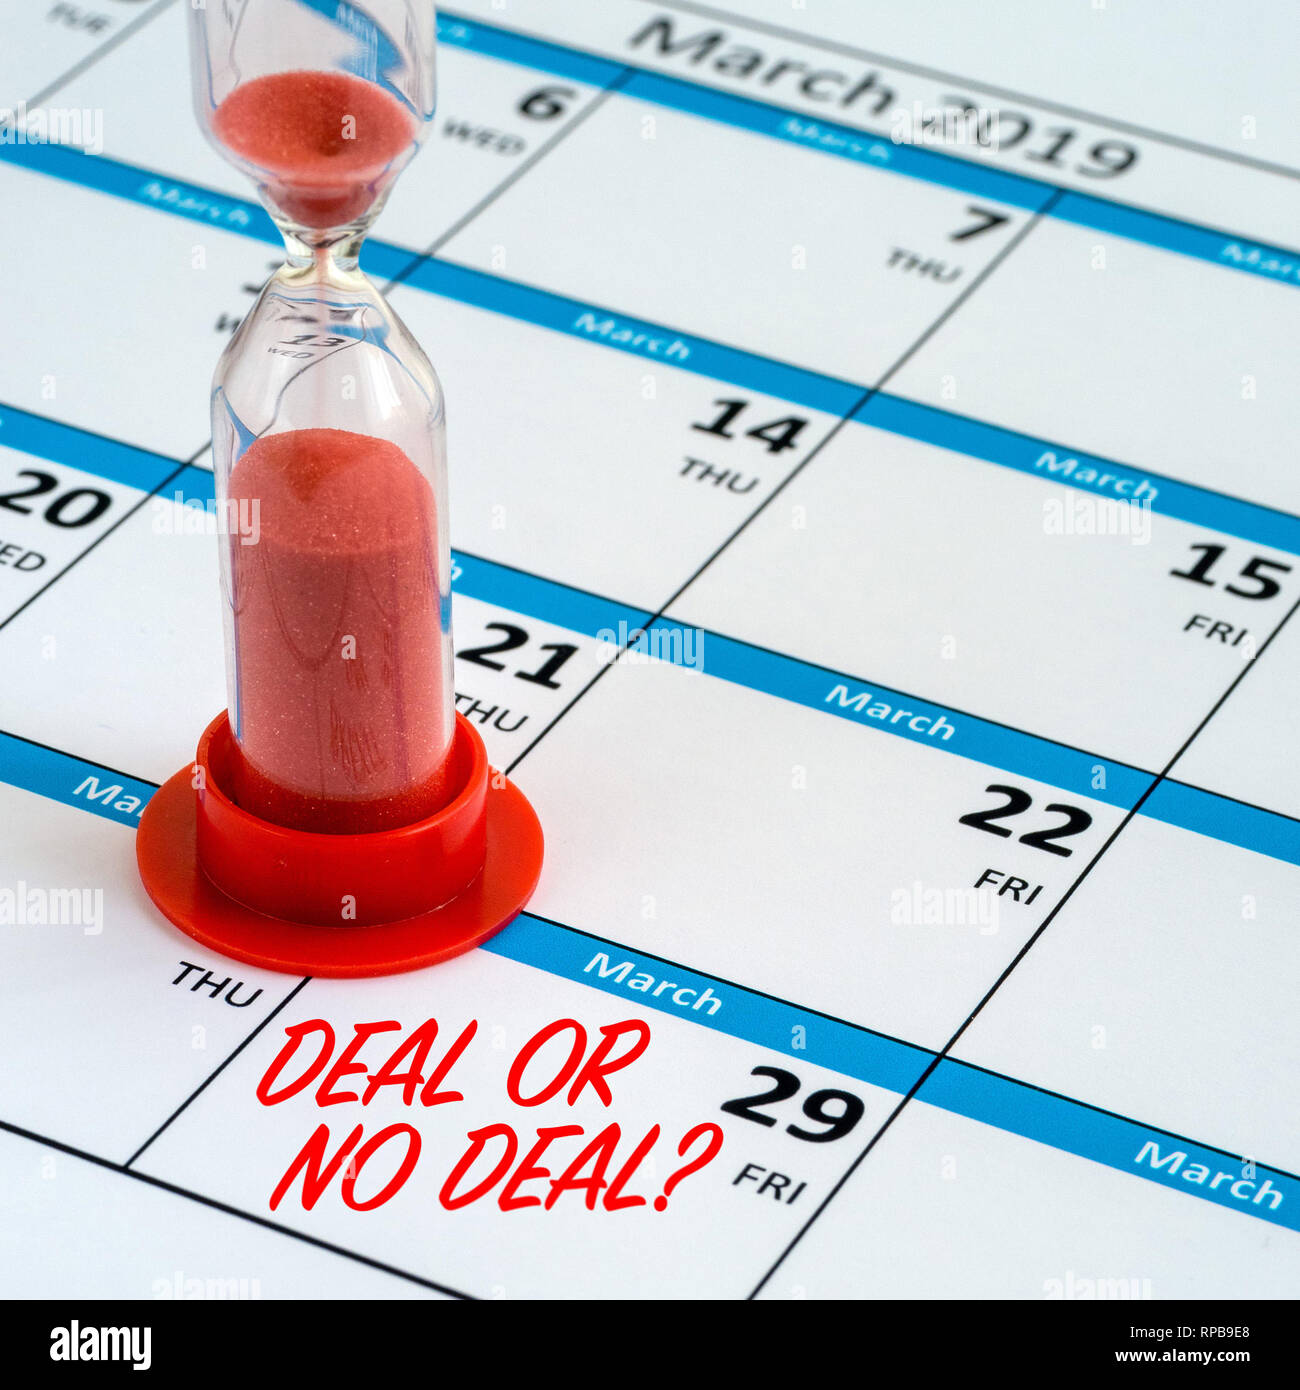 Concept image of time running out, or running down the clock to Brexit day deadline on 29th March 2019 shown by a calendar and hourglass timer. Stock Photo